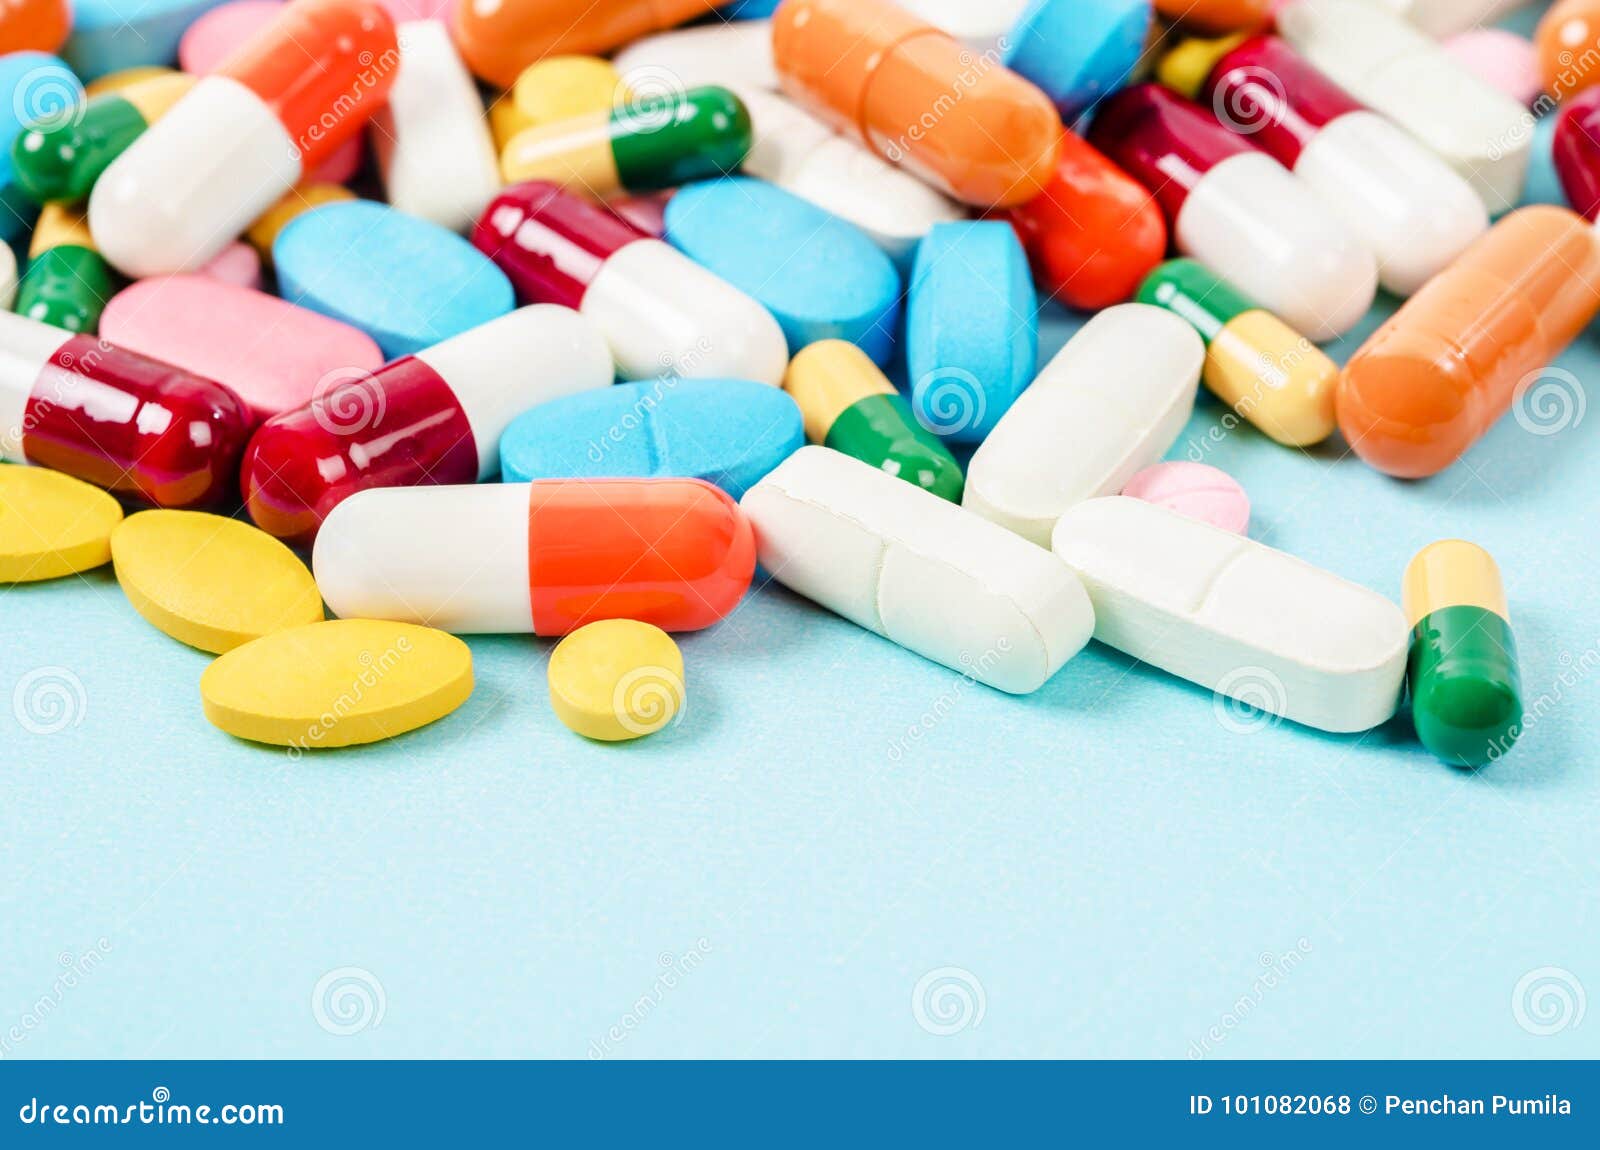 generic prescription medicine drugs pills and assorted pharmaceutical tablets.